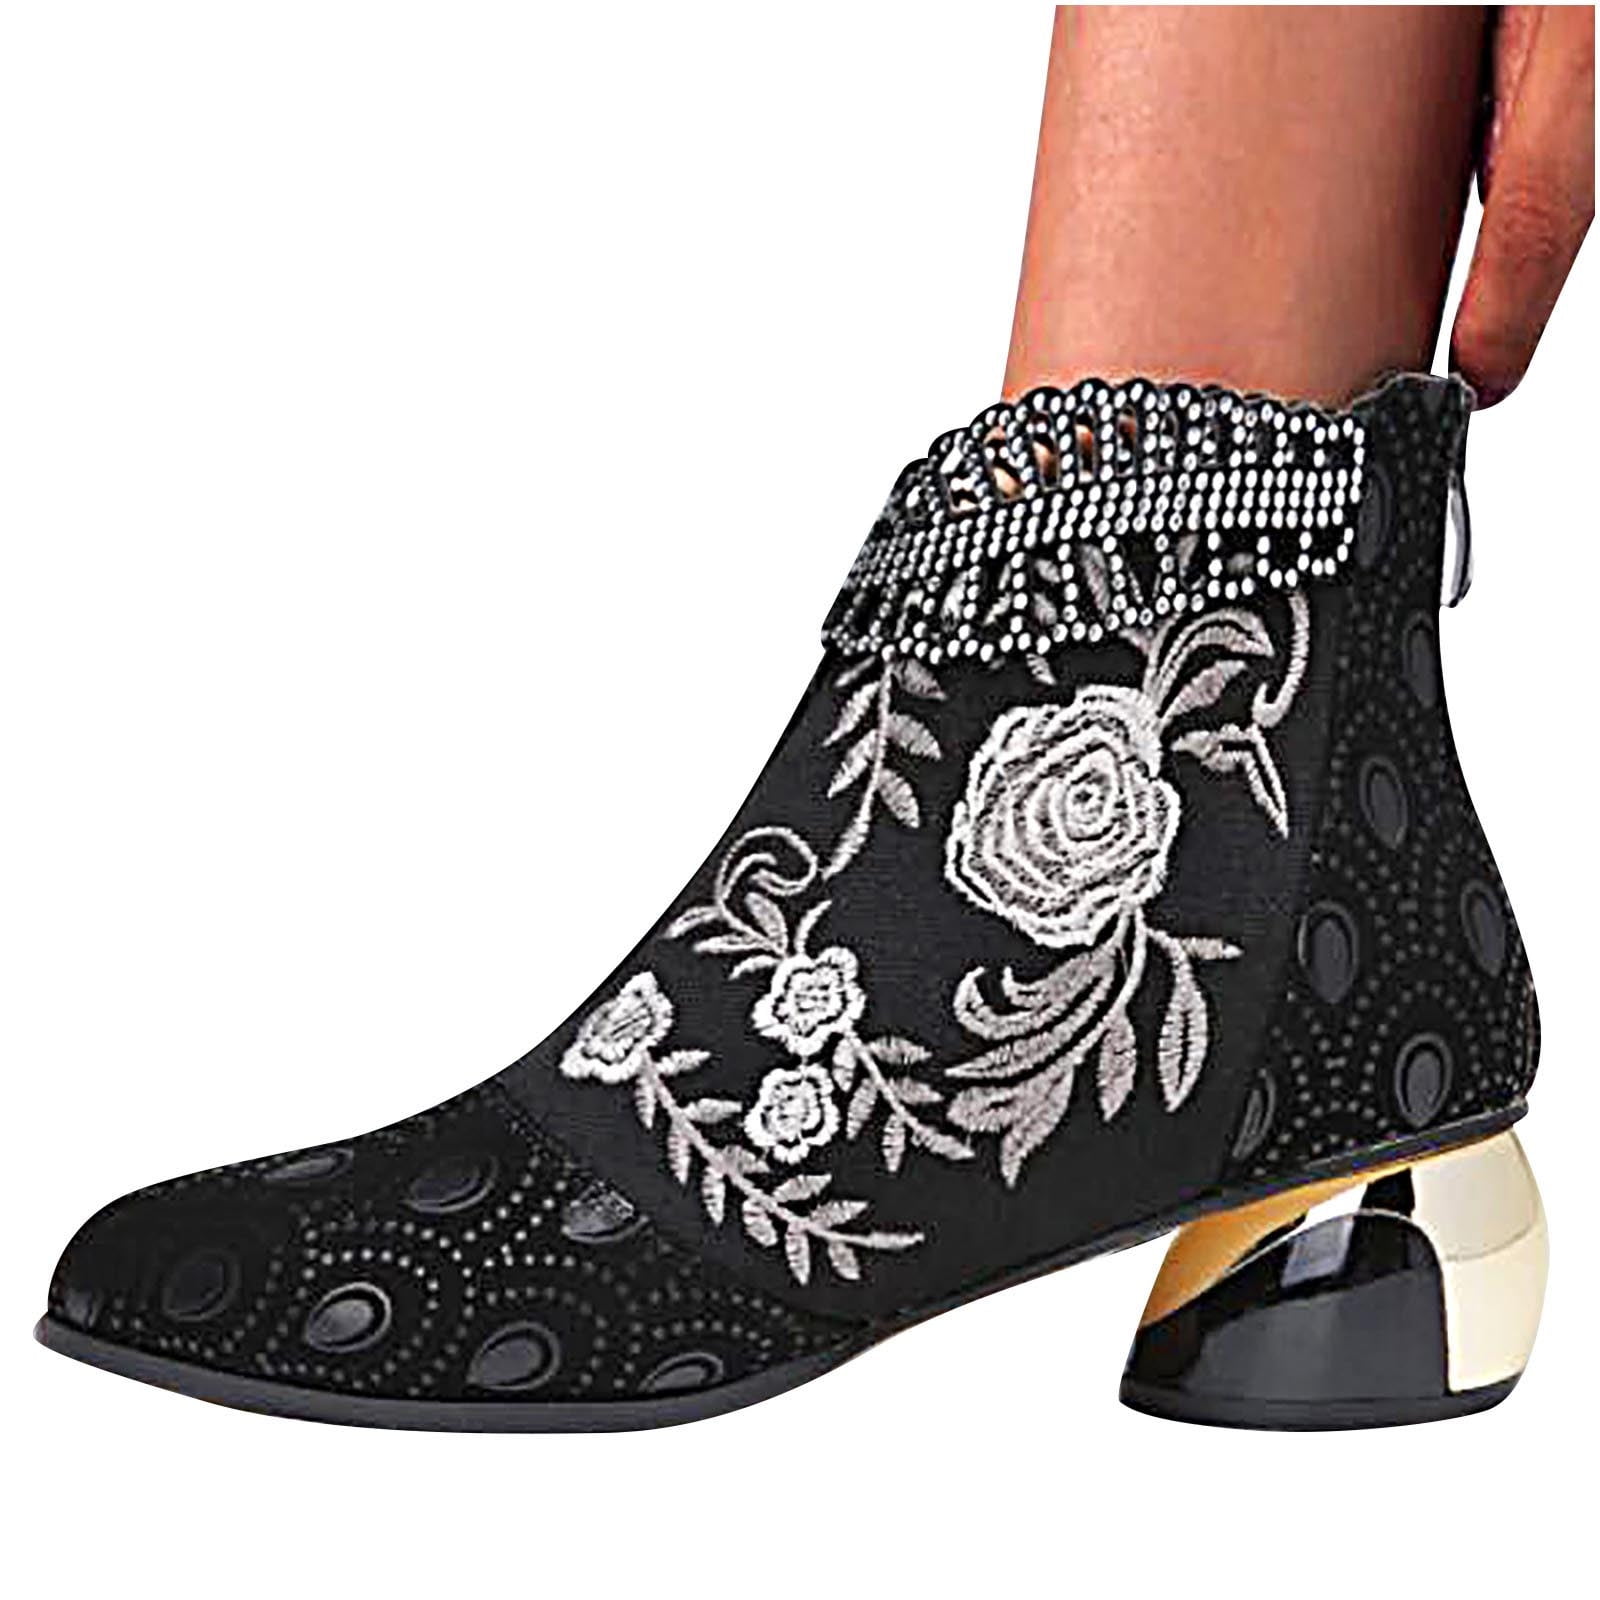 Womens Fashion Floral Embroidery Cowboy Boots Chunky Heel Almond Toe ...